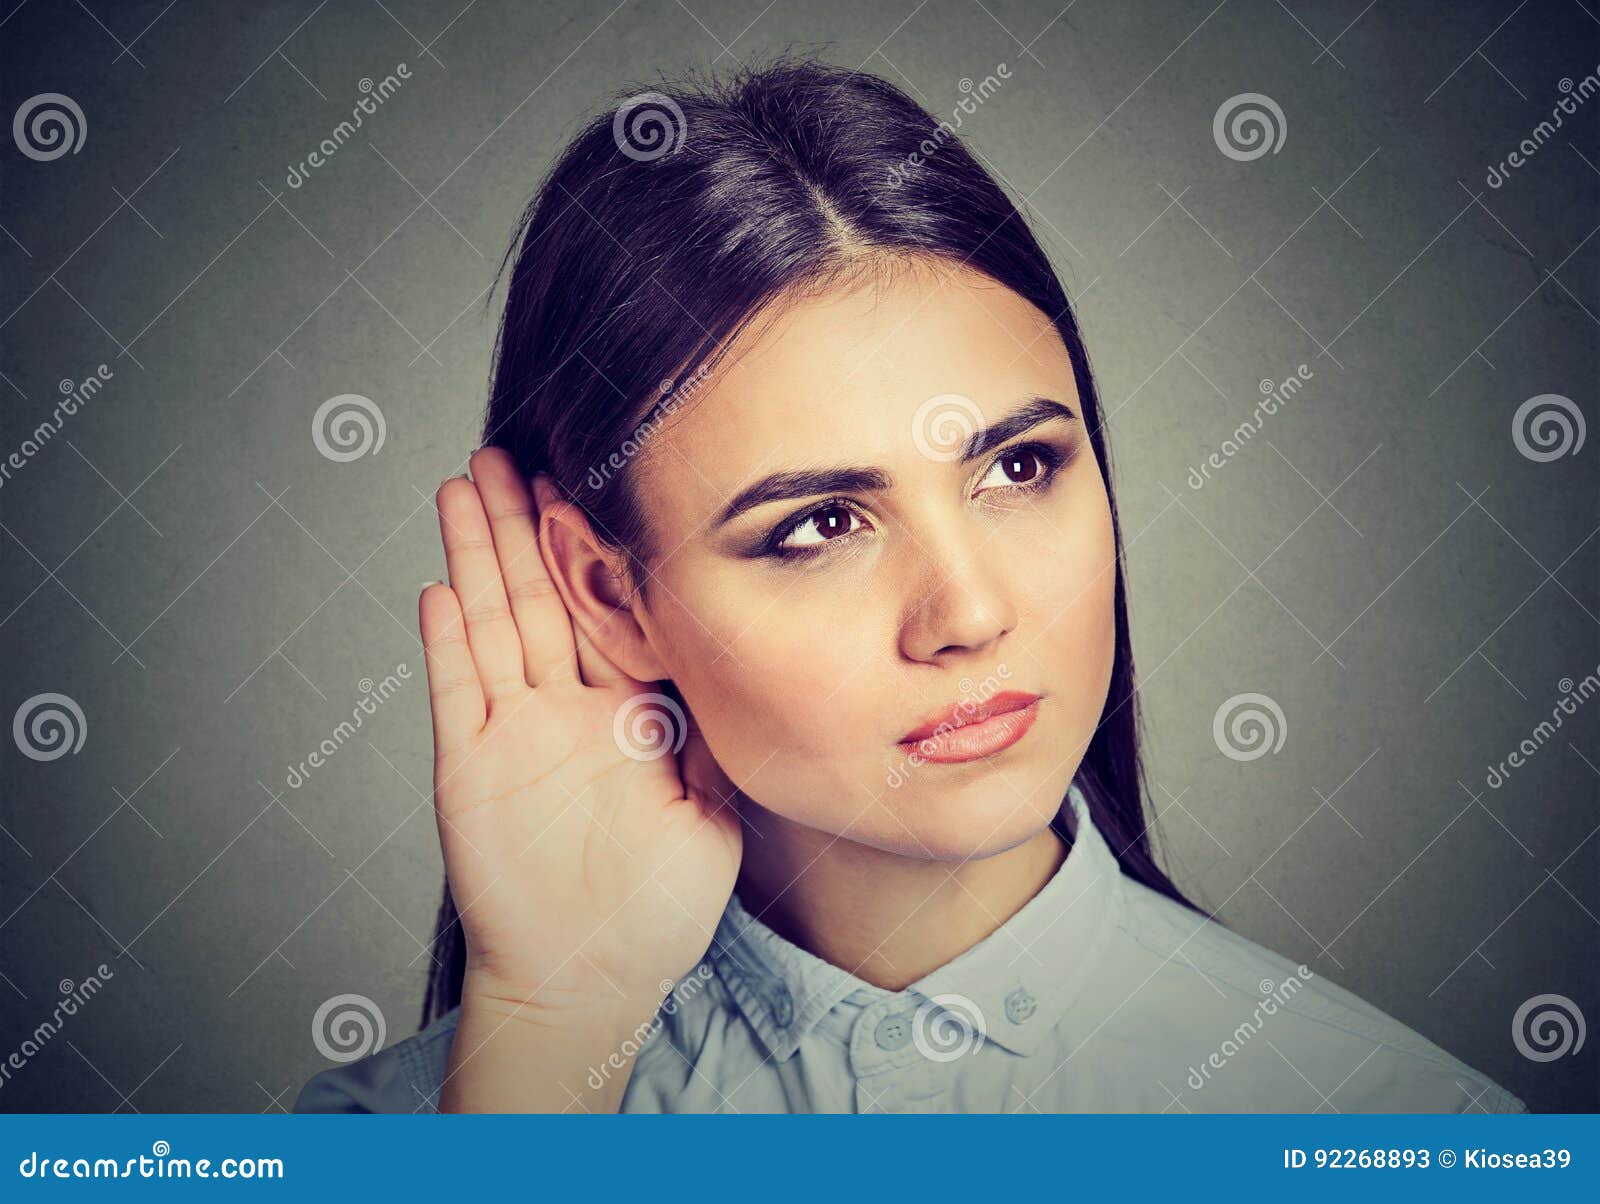 woman with hand to ear gesture listening carefully